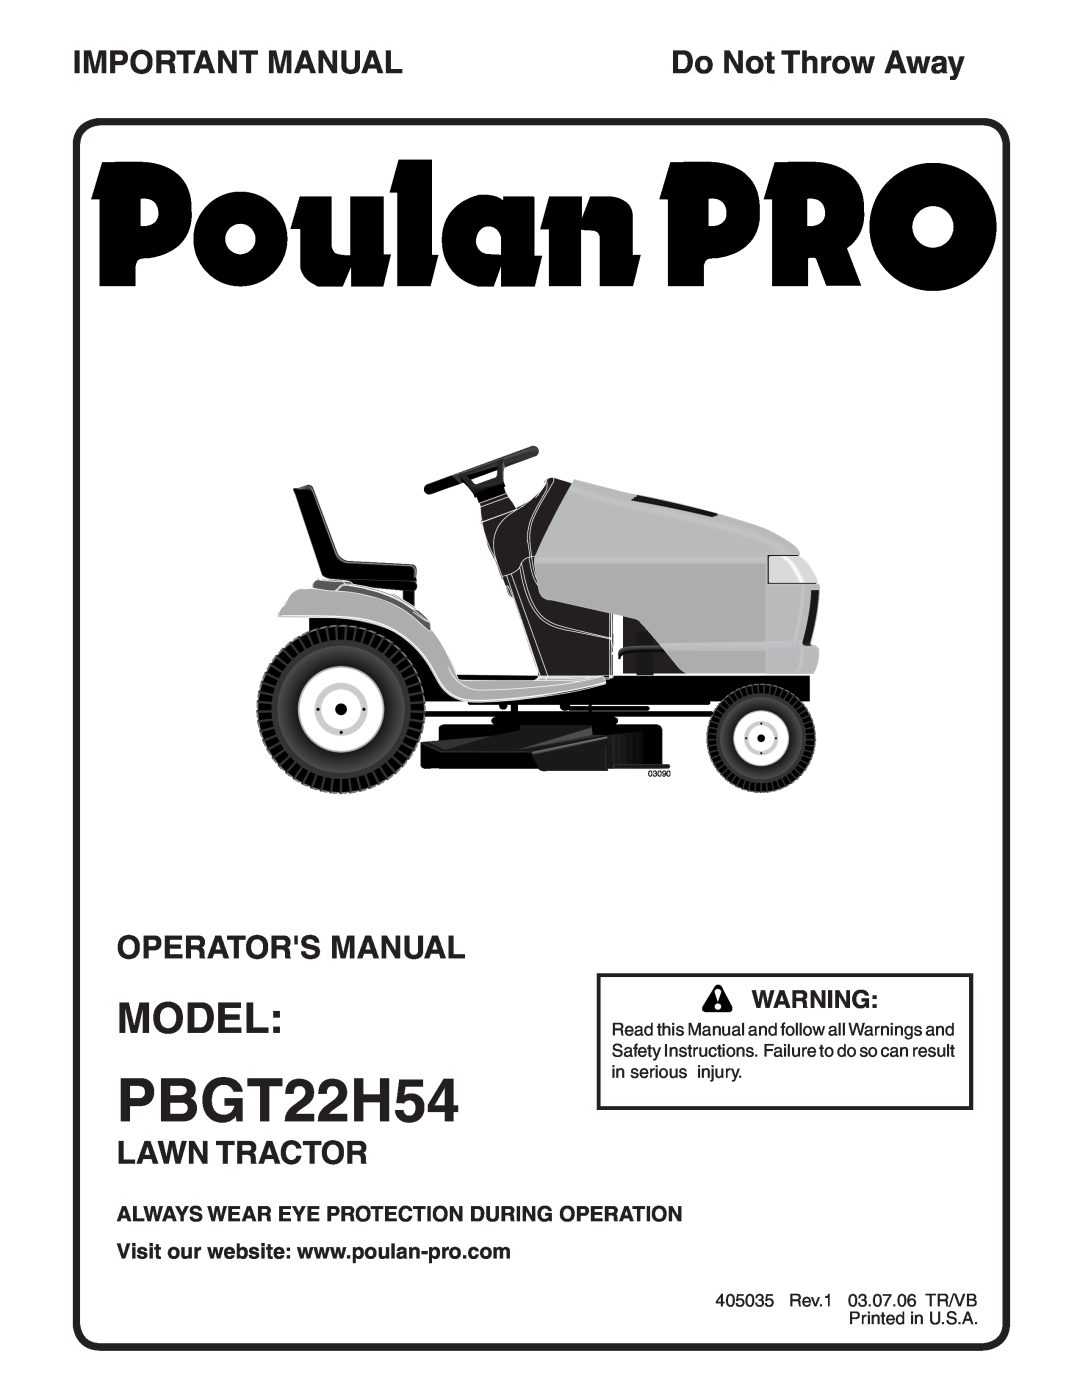 Poulan 405035 manual Model, Important Manual, Operators Manual, Lawn Tractor, Always Wear Eye Protection During Operation 